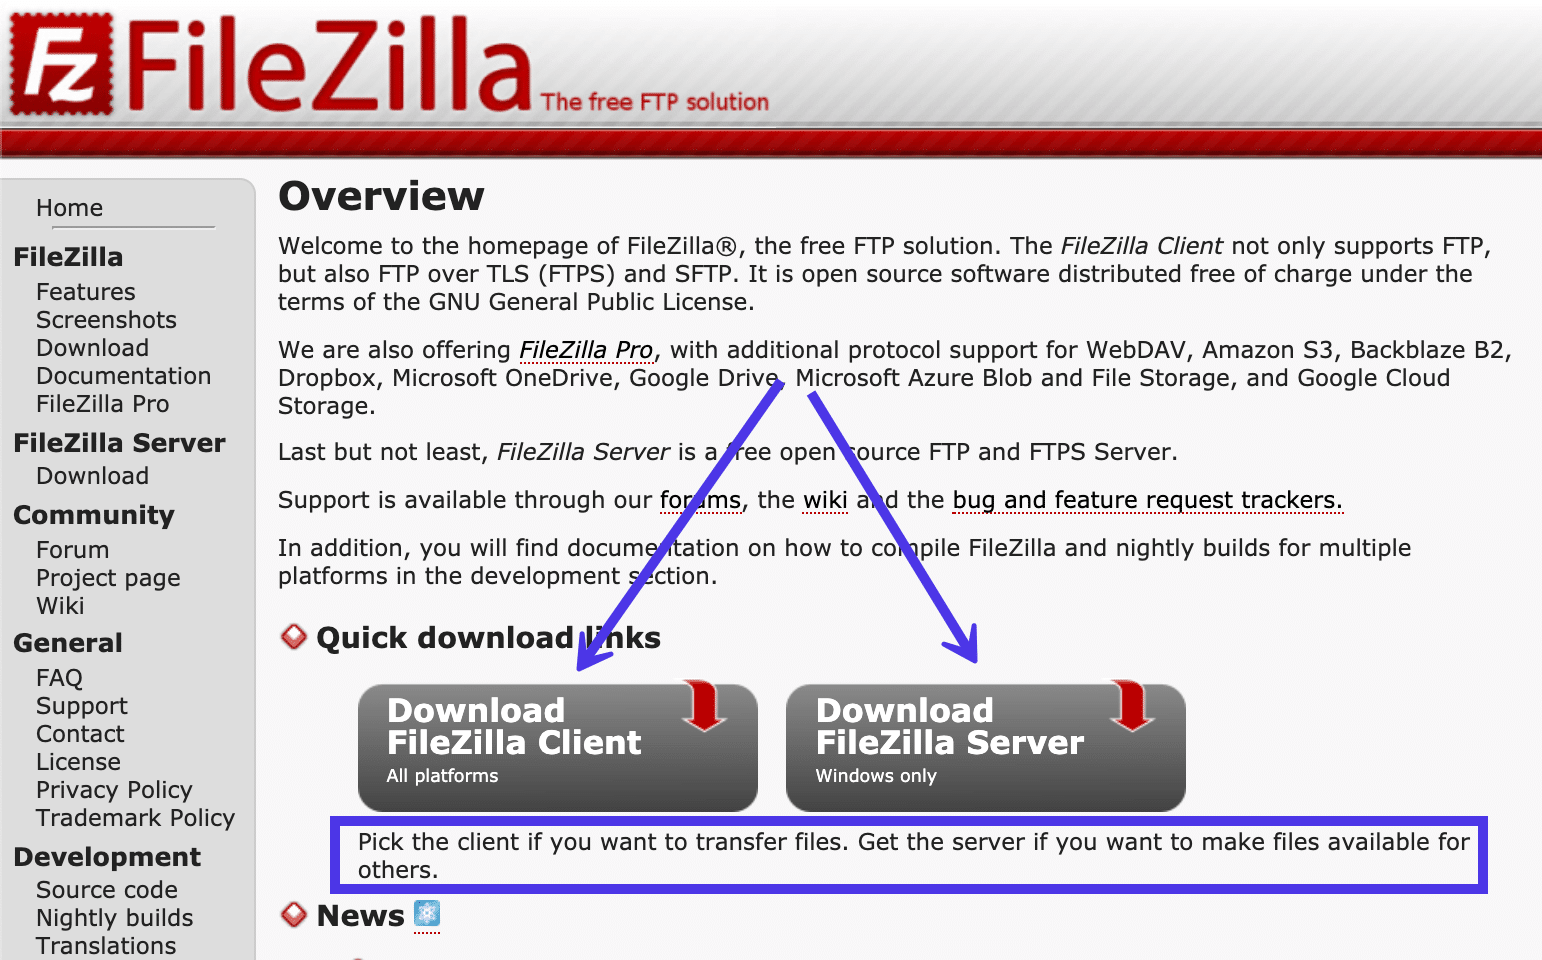 The FileZilla website had two download options for the FileZilla Client and the FileZilla Server.